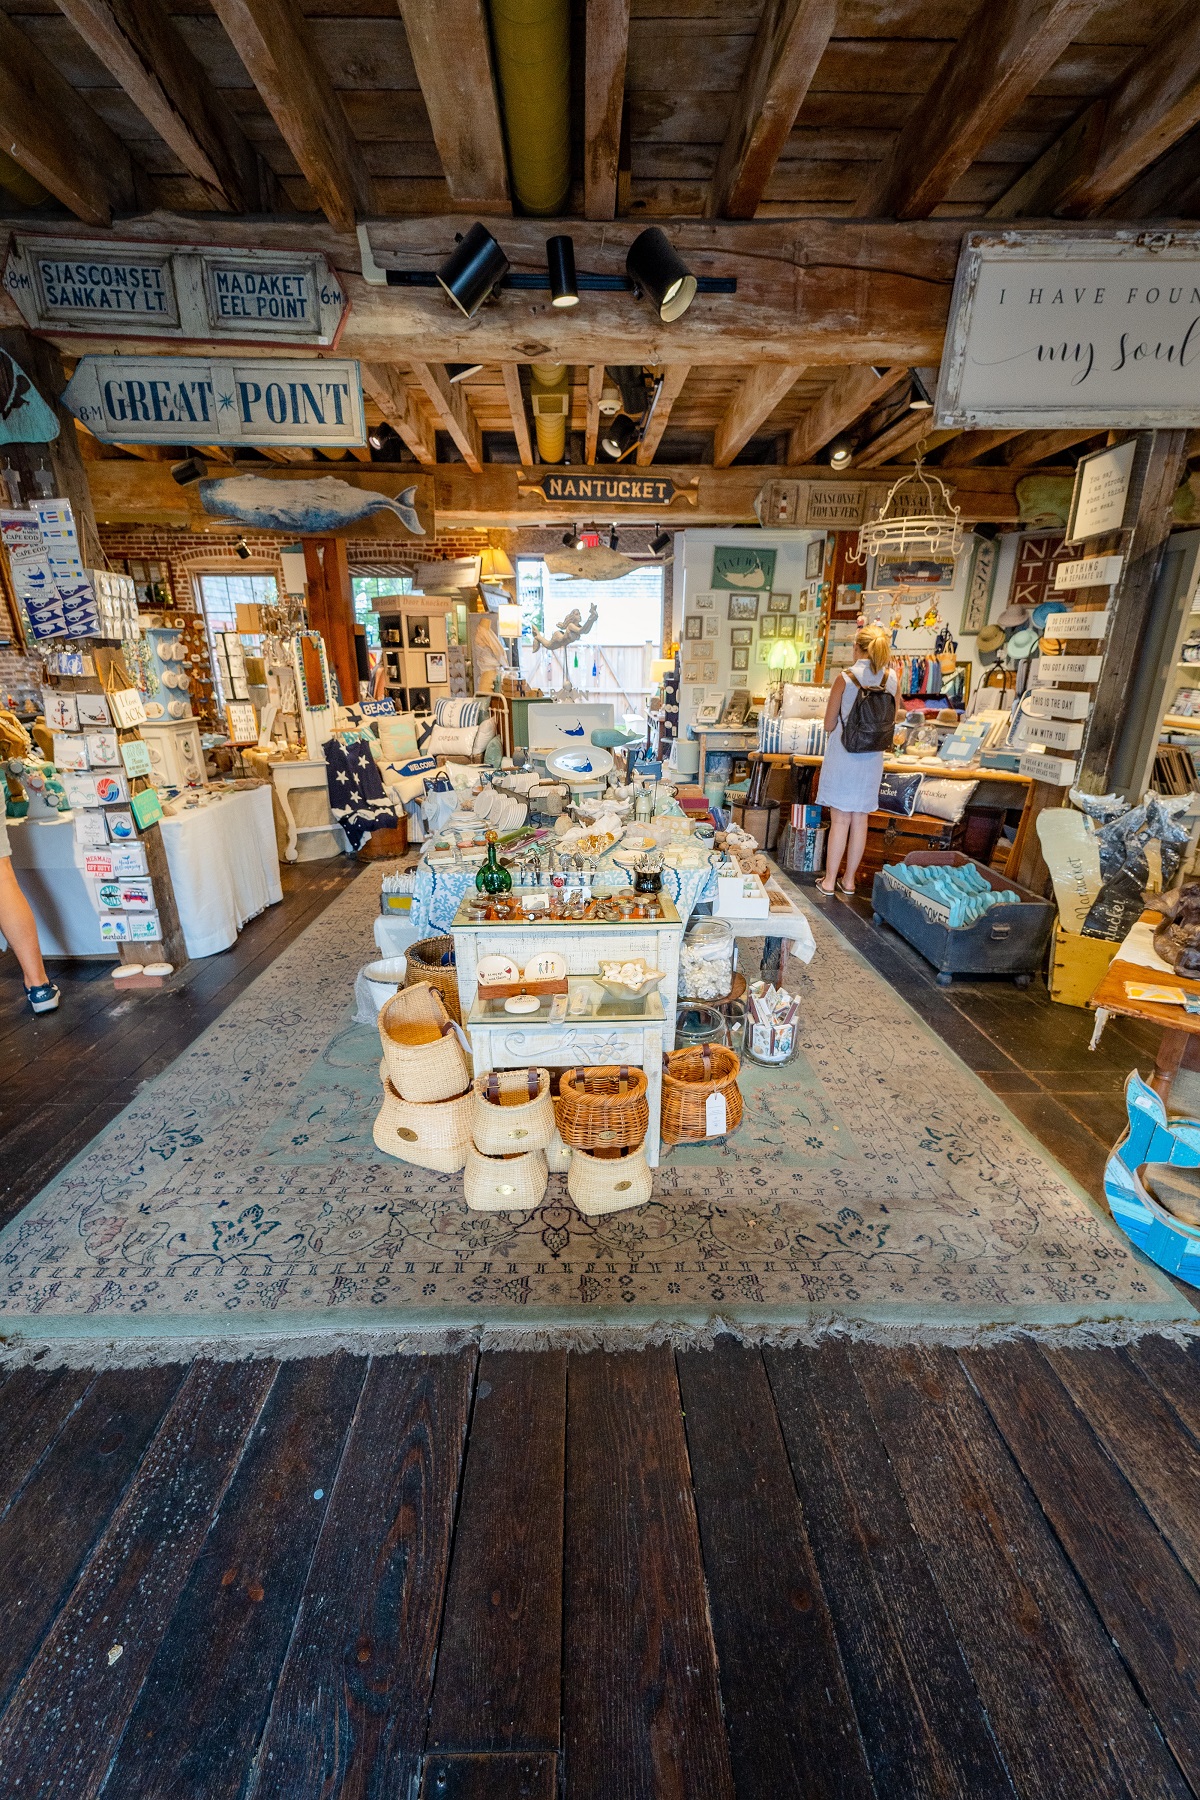 Shopping - one of the best things to do in Nantucket